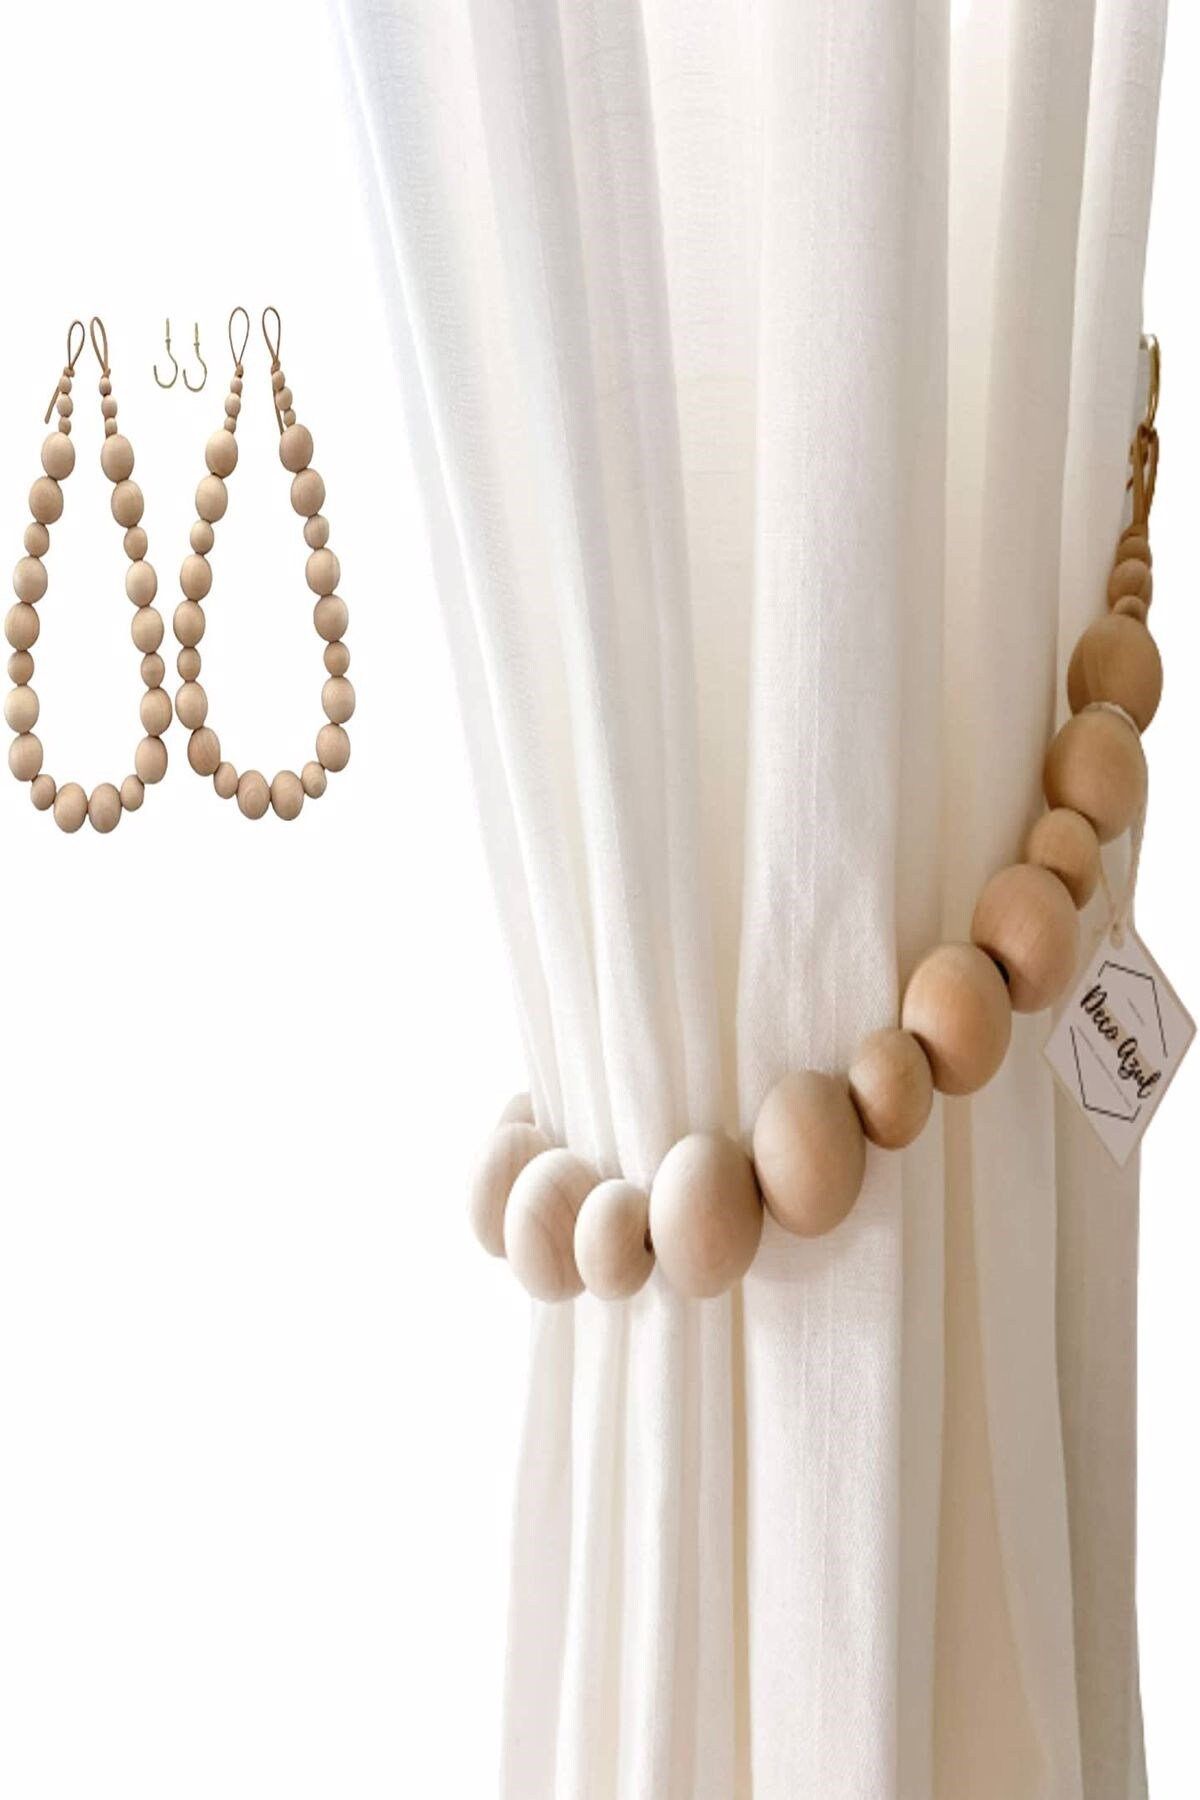 Curtain Accessories: Enhance Your Window Treatments with Stylish Curtain Accessories